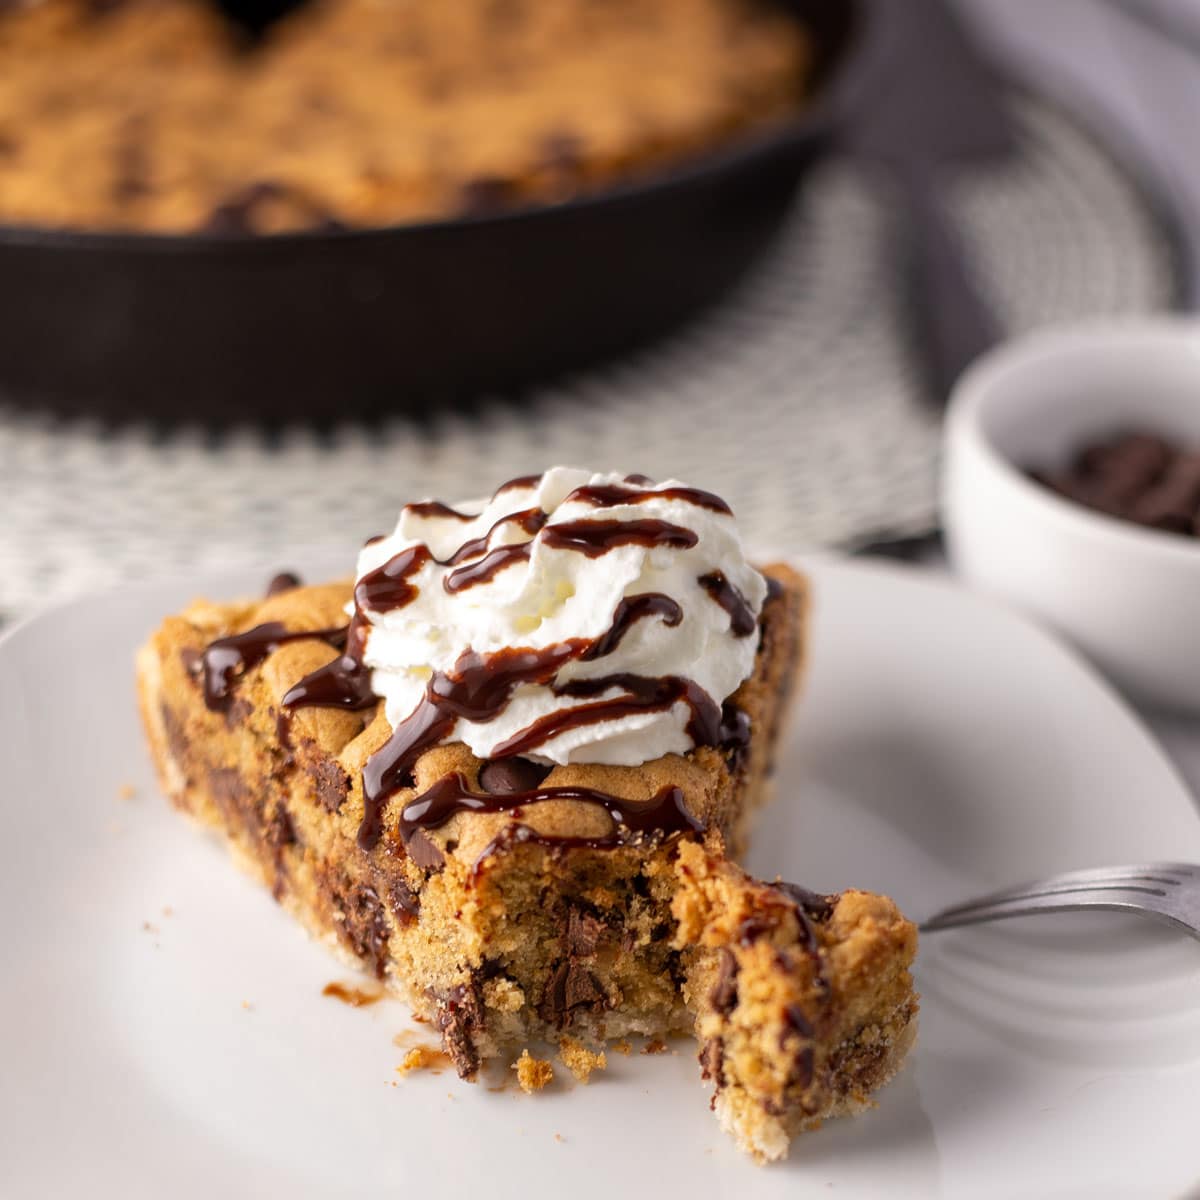 Tender, tasty chocolate chip cookie pie sliced and served with whipped cream and chocolate sauce.